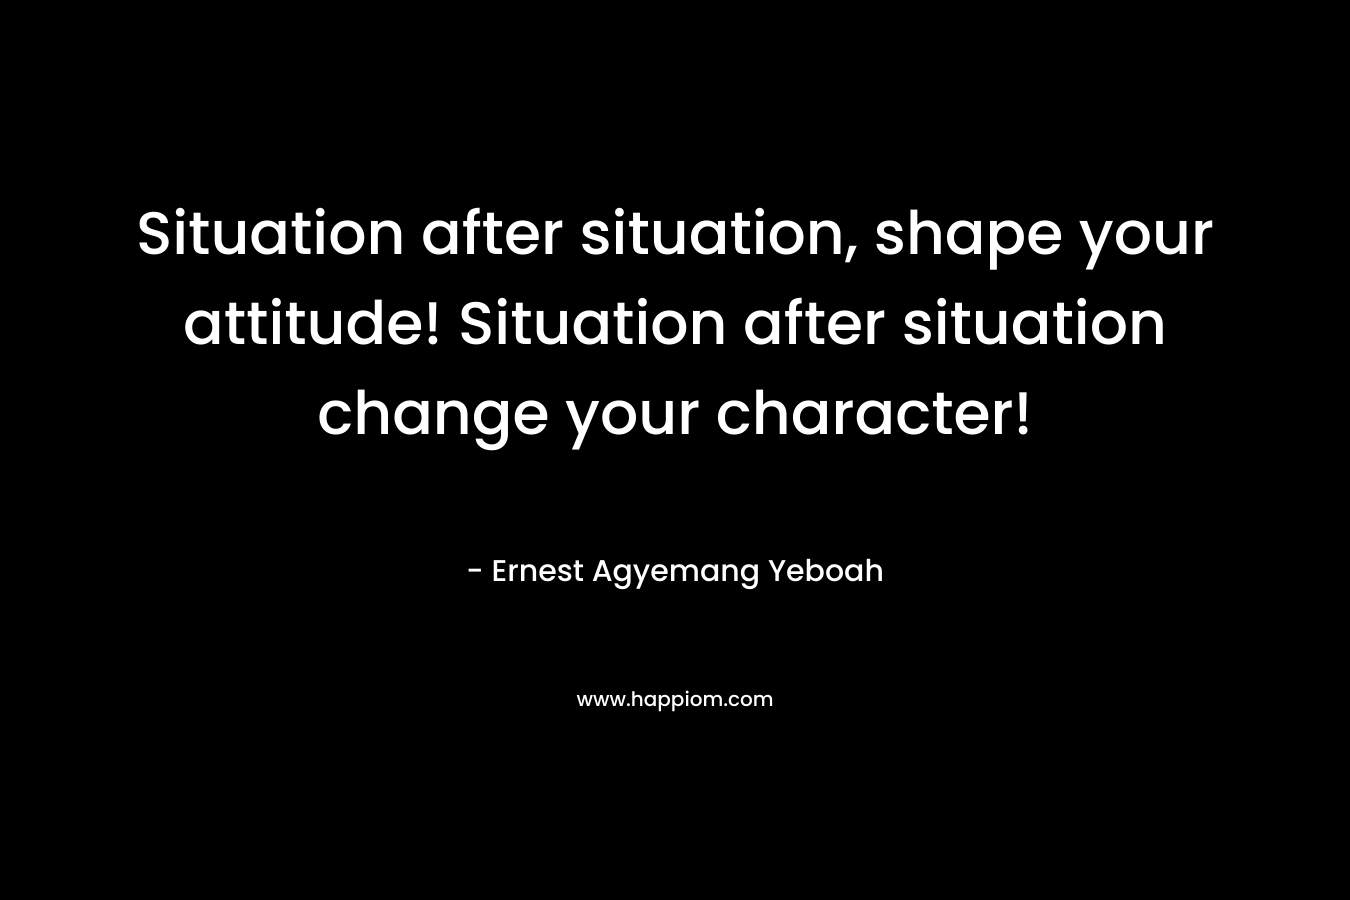 Situation after situation, shape your attitude! Situation after situation change your character!